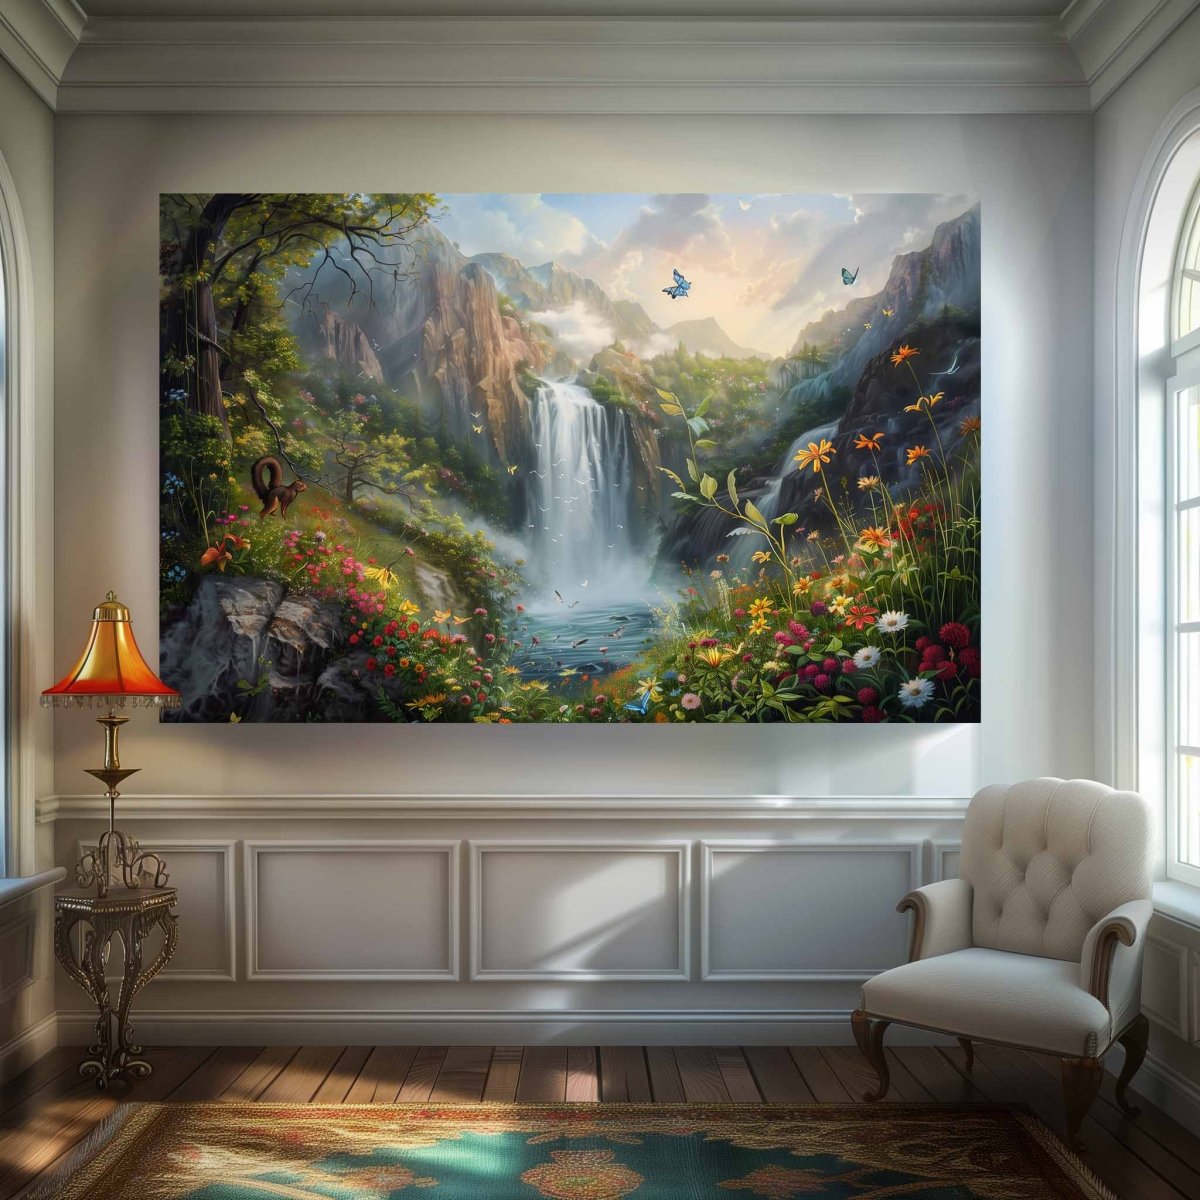 The Whispering Waterfall Canvas Wall Paining (36 x 24 Inches)